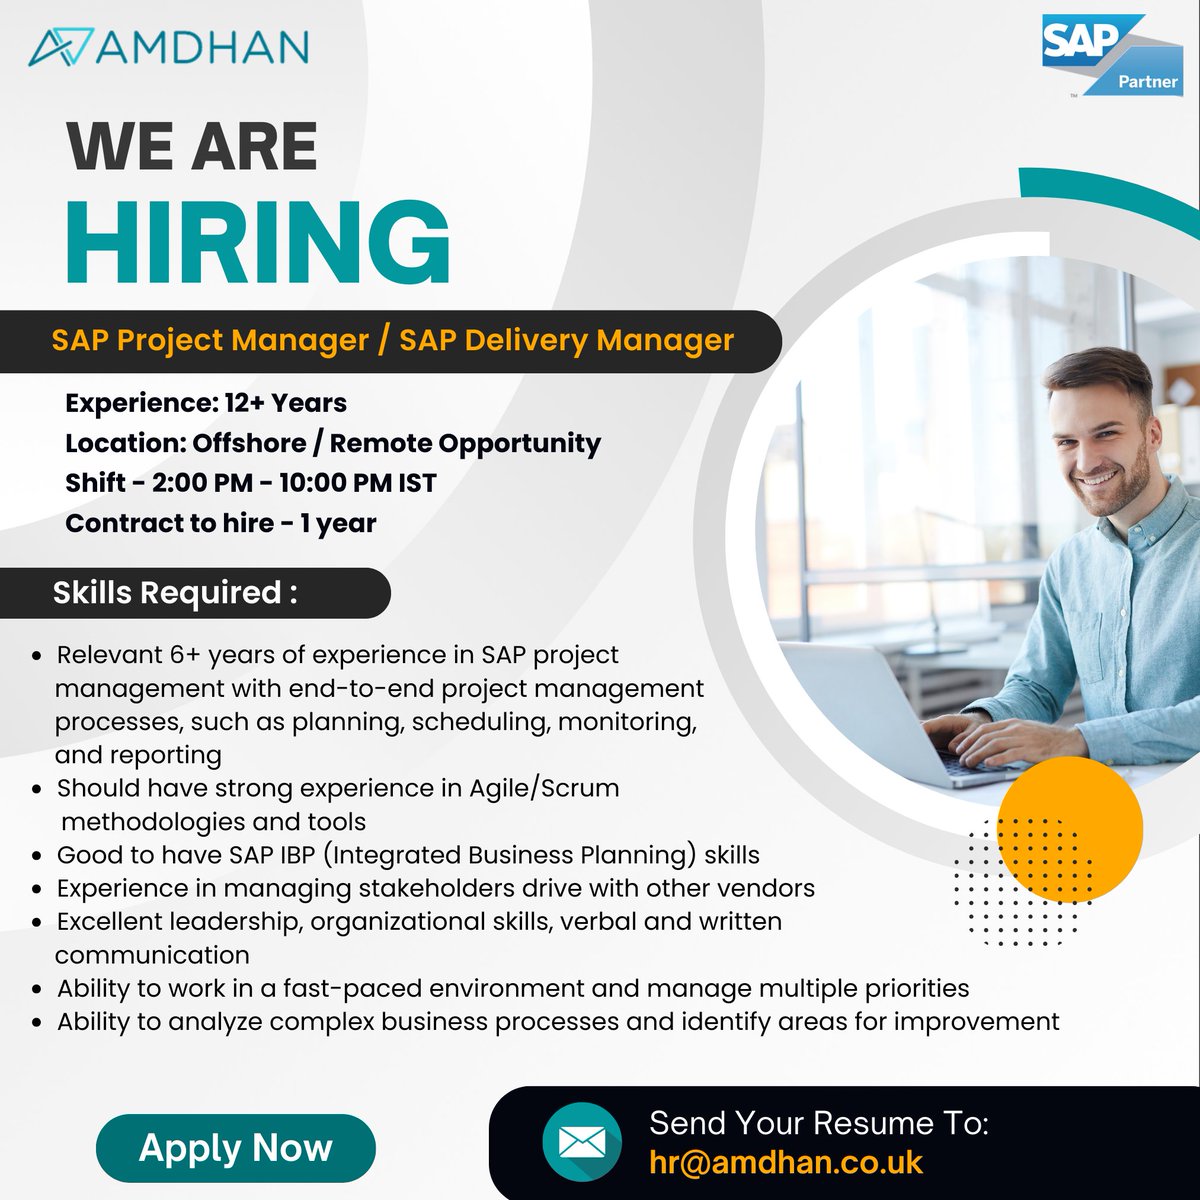 We Are Hiring

𝐏𝐨𝐬𝐢𝐭𝐢𝐨𝐧: SAP Project Manager / SAP Delivery Manager

𝐀𝐩𝐩𝐥𝐲 𝐎𝐧 - hr@amdhan.co.uk

#sapprojectmanager #sapprojectmanagerhiring #SAPDeliveryManager #remoteopportunity #remotejob #hiring #sapjobs #saphiring #sapjob #itjobs #recruitment #amdhan #sap